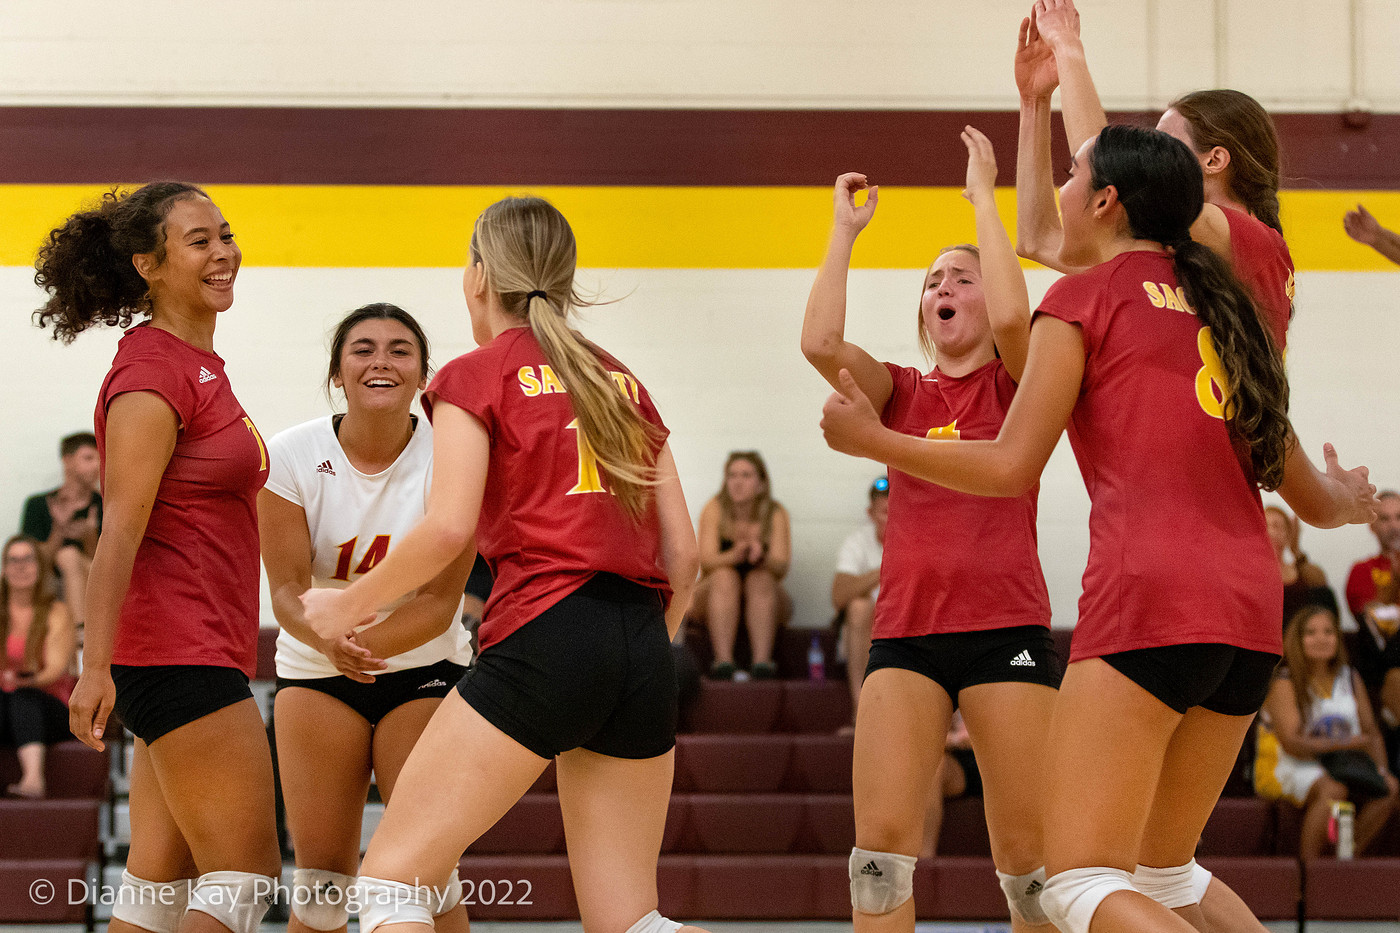 Sac City opens up the Shasta Classic by sweeping the host Knights 3-0 (25-12, 25-18, 25-18)